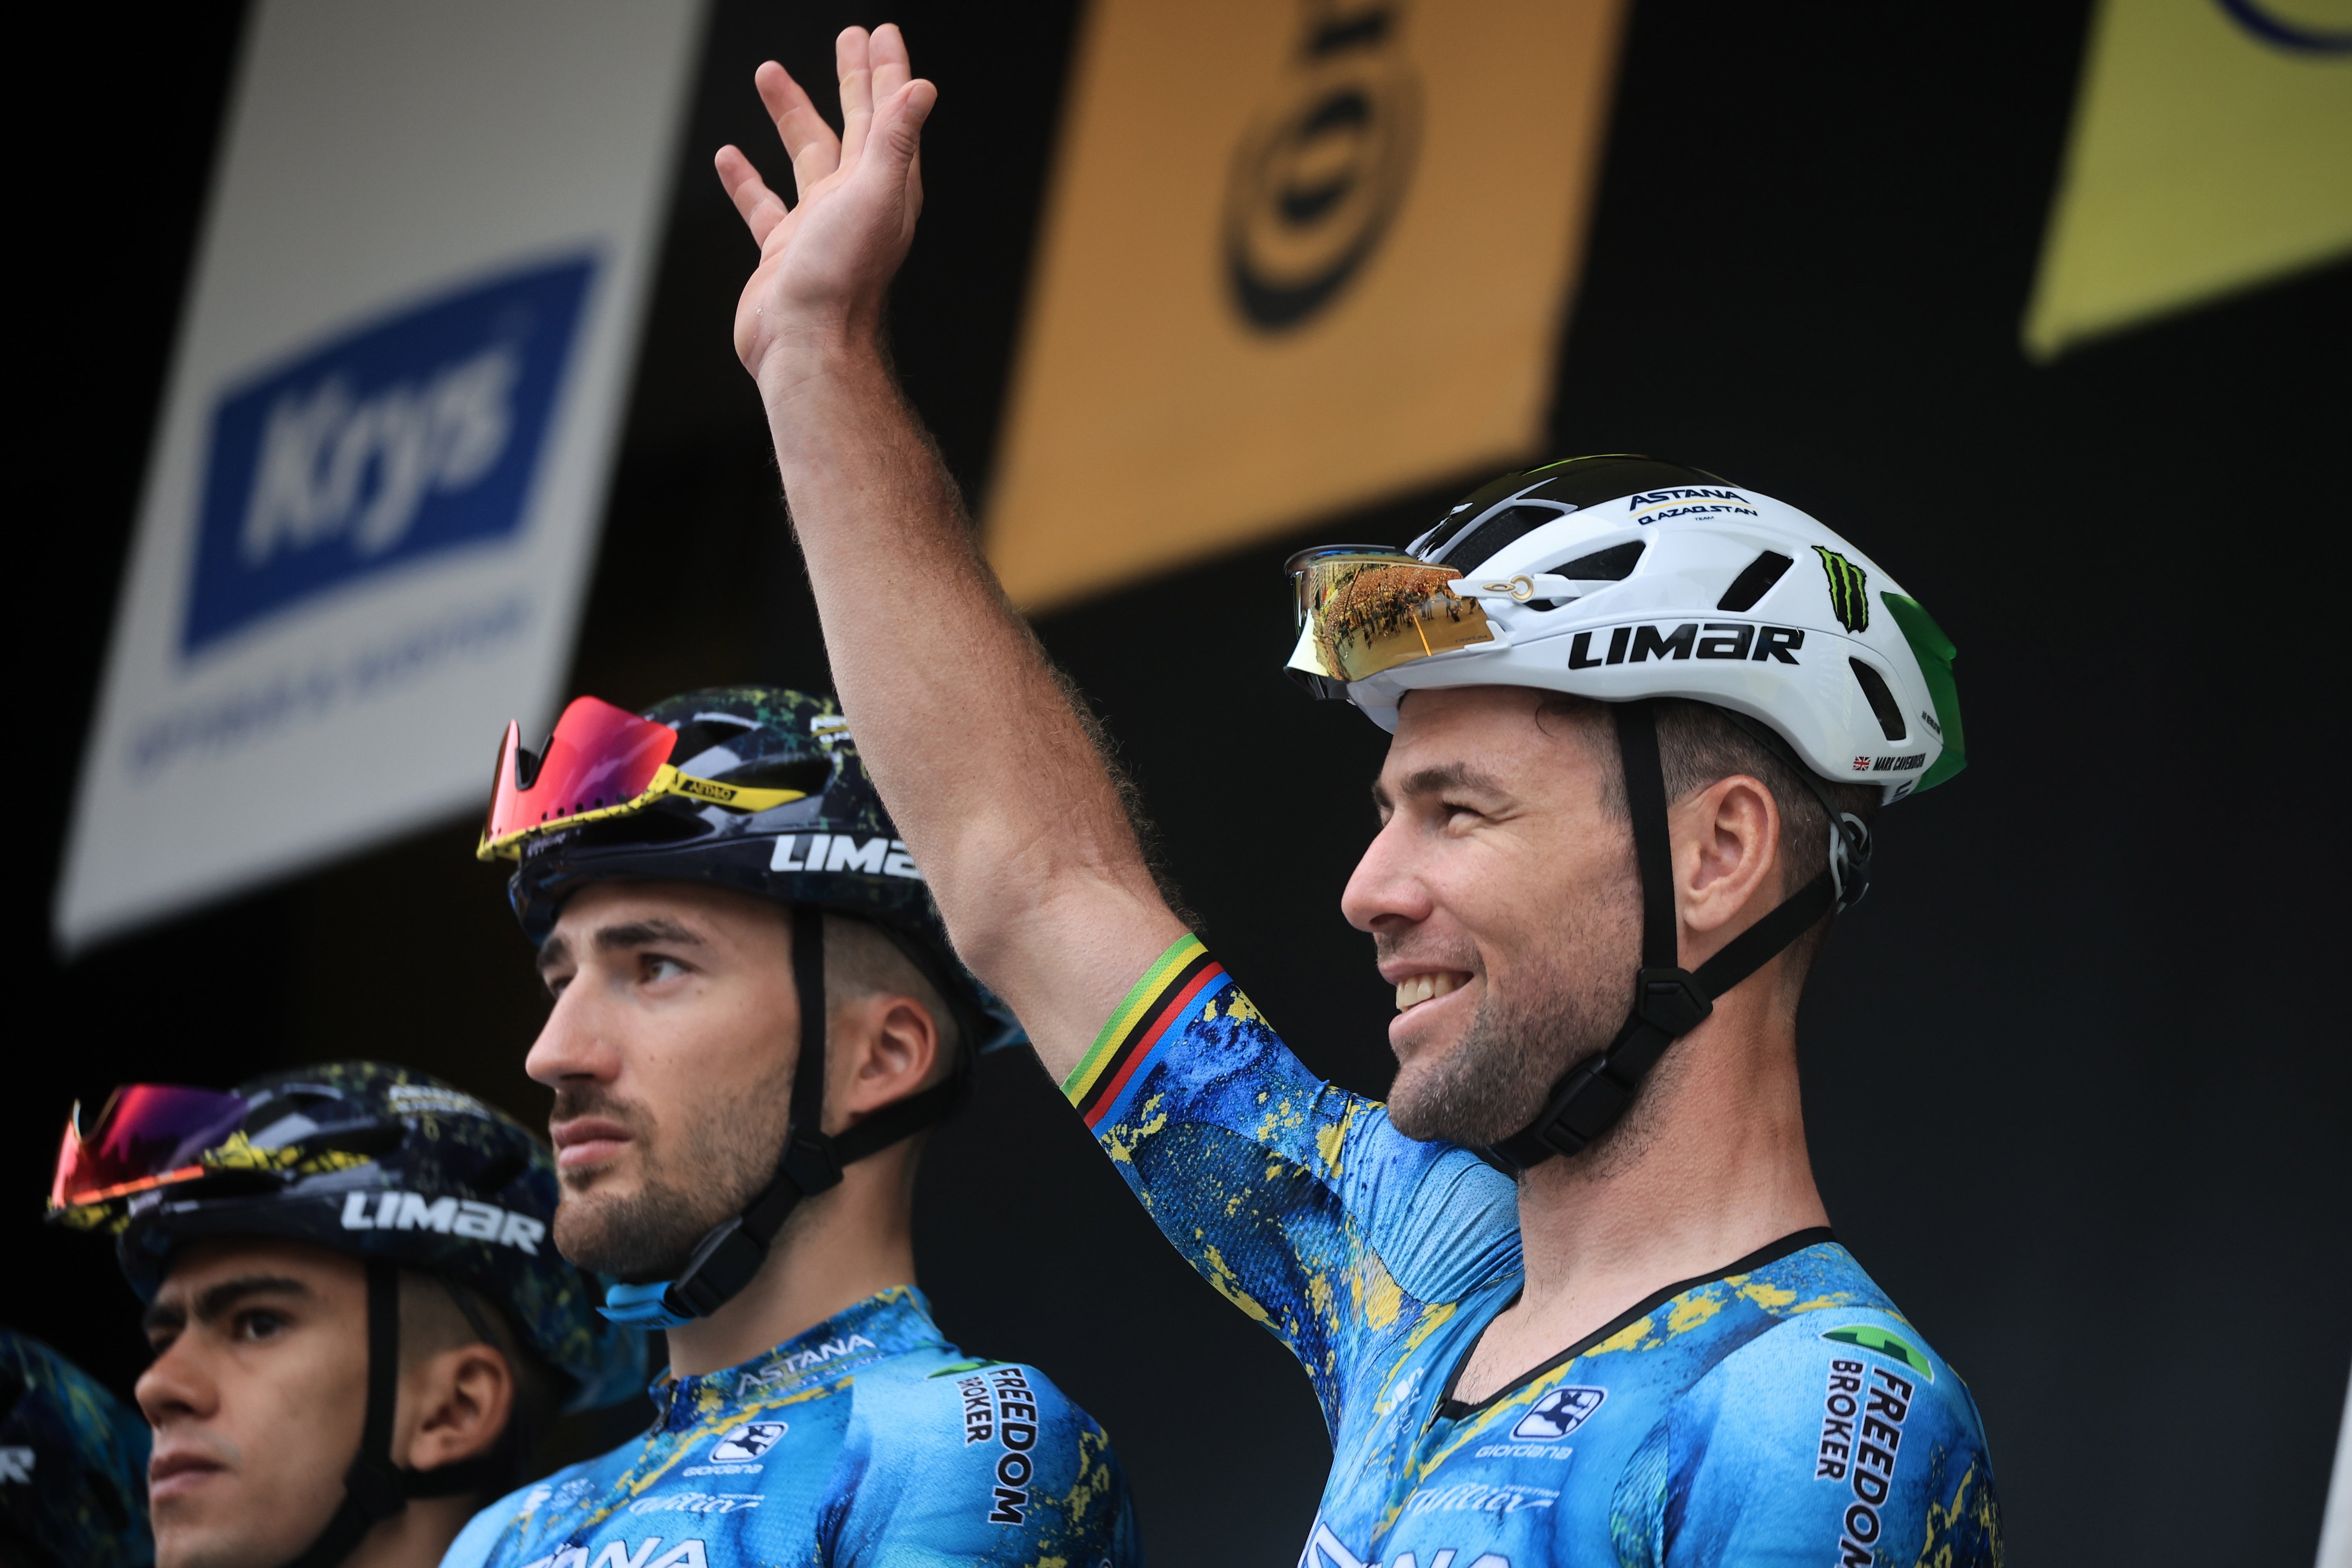 Mark Cavendish is hunting a record-breaking Tour de France stage win